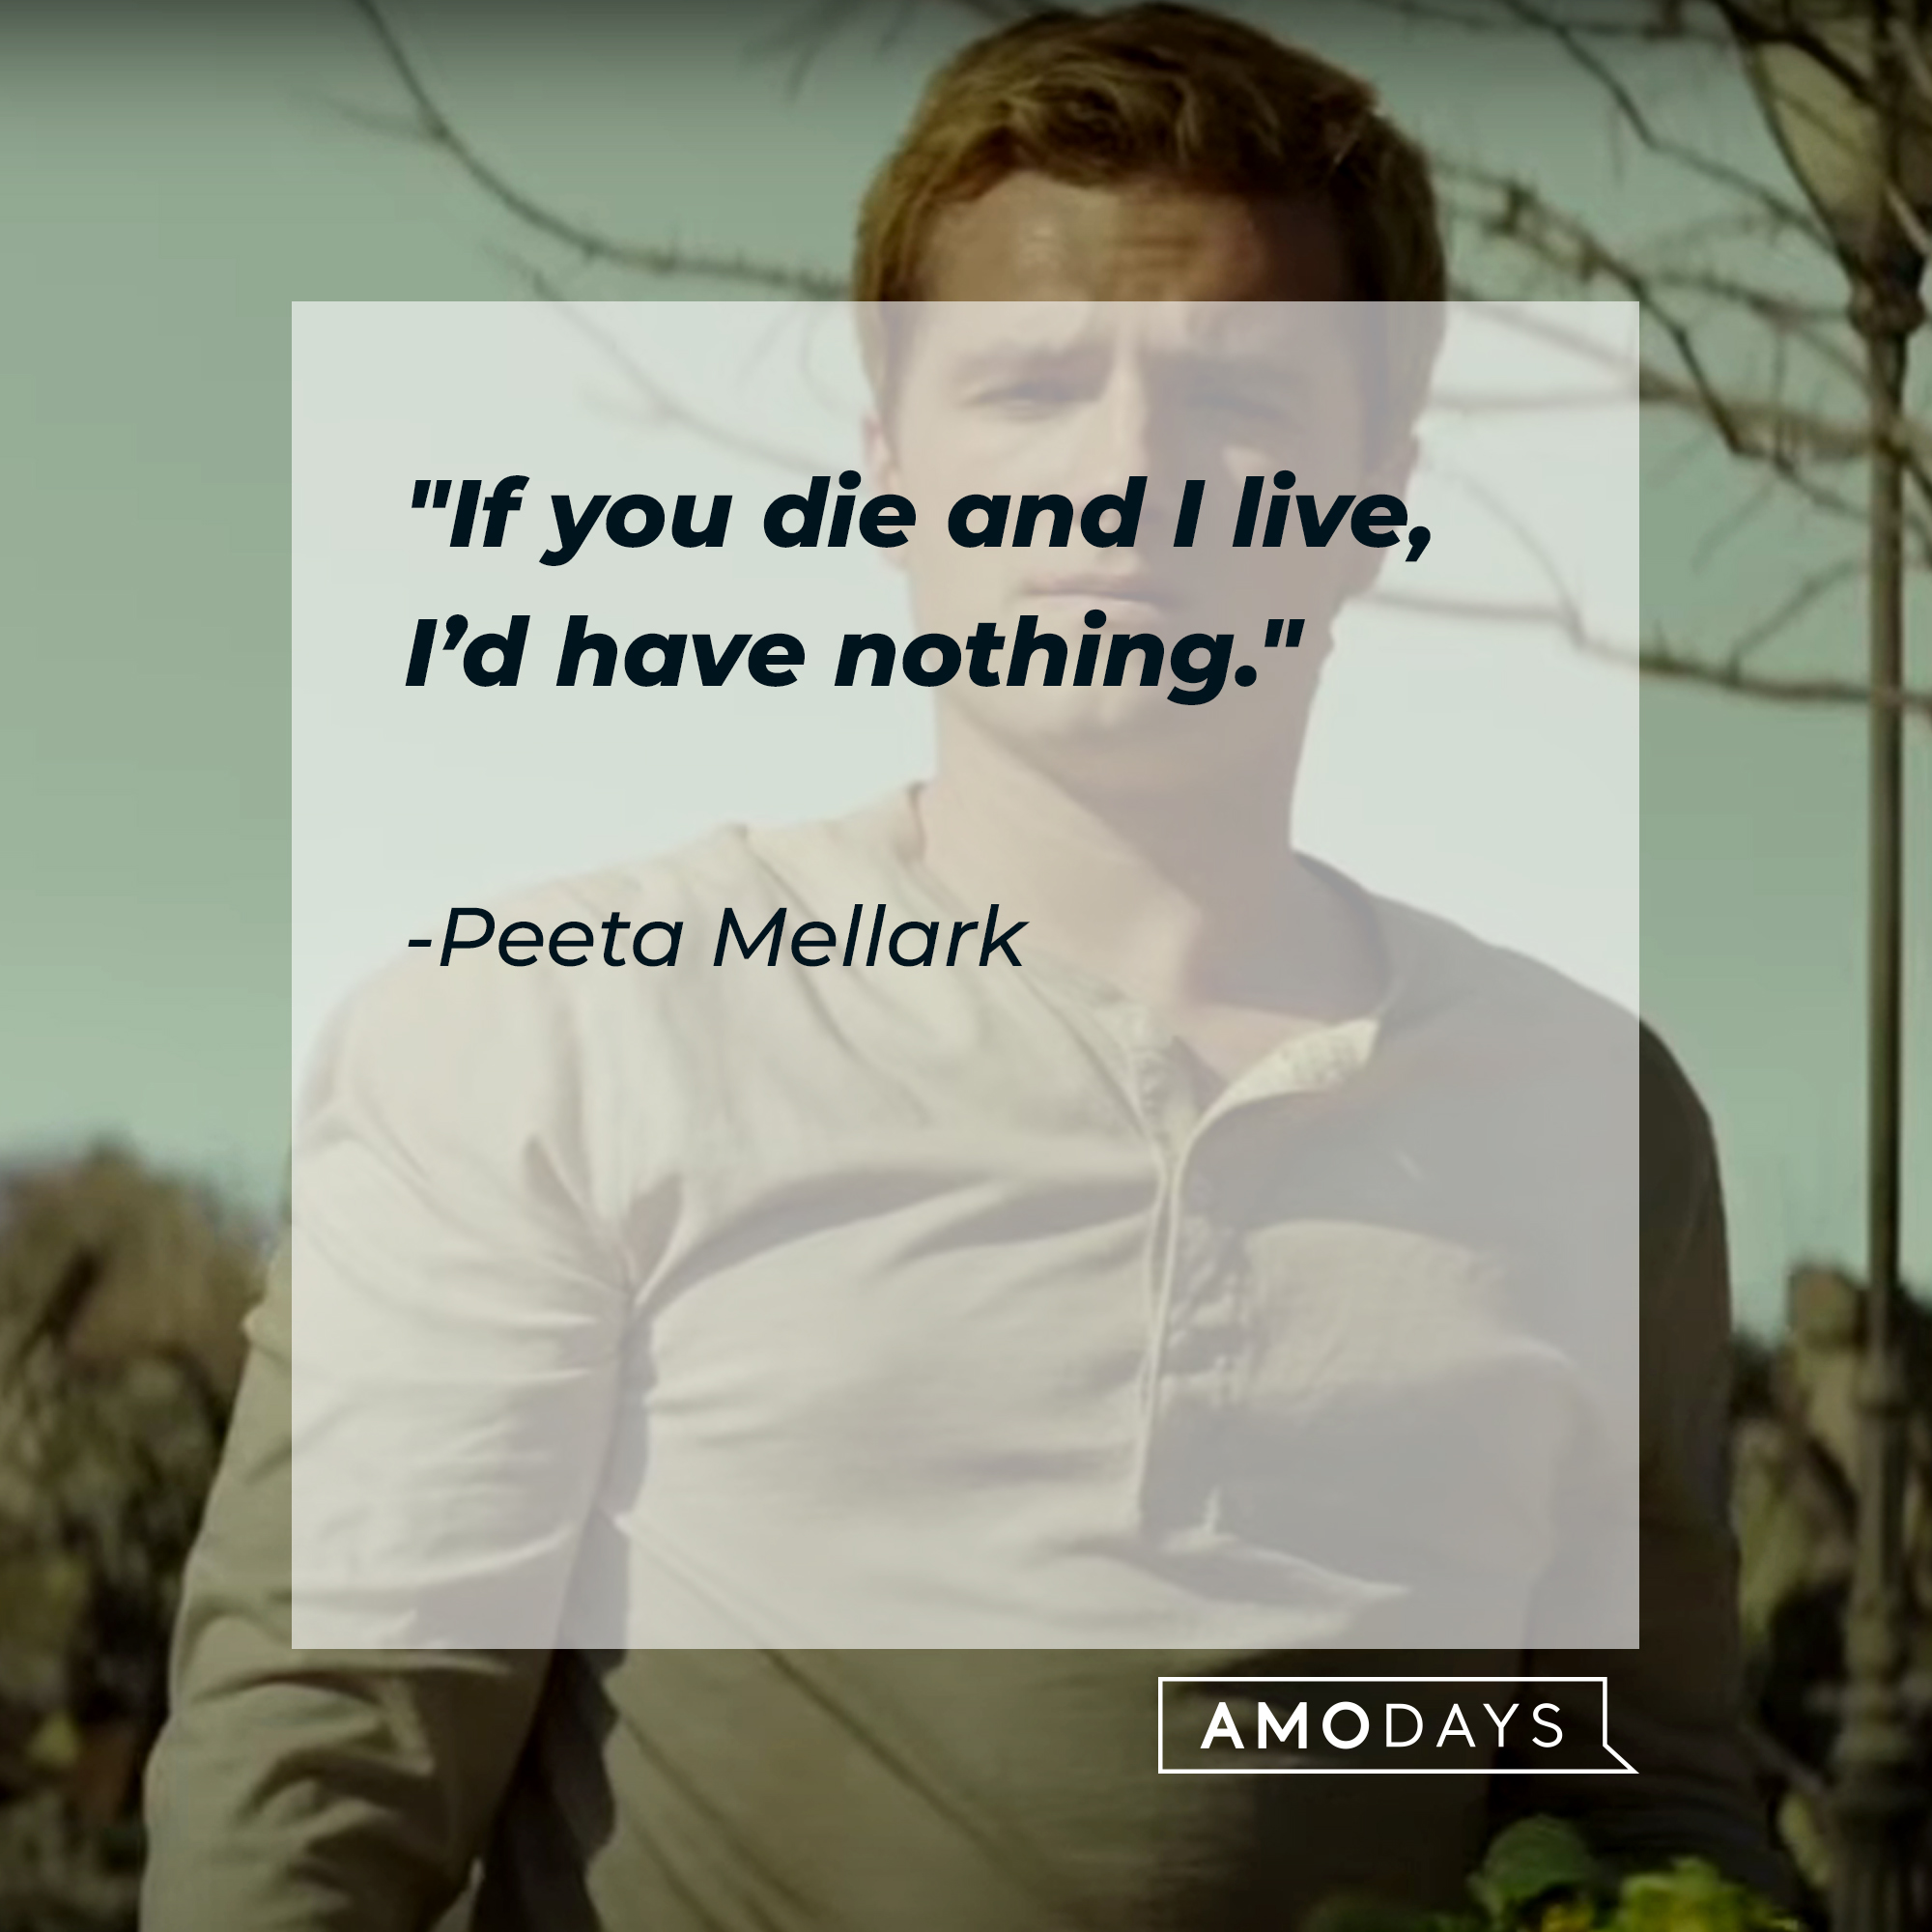 Peeta Mellark, with his quote: "If you die and I live, I’d have nothing." | Source: Youtube.com/TheHungerGamesMovies